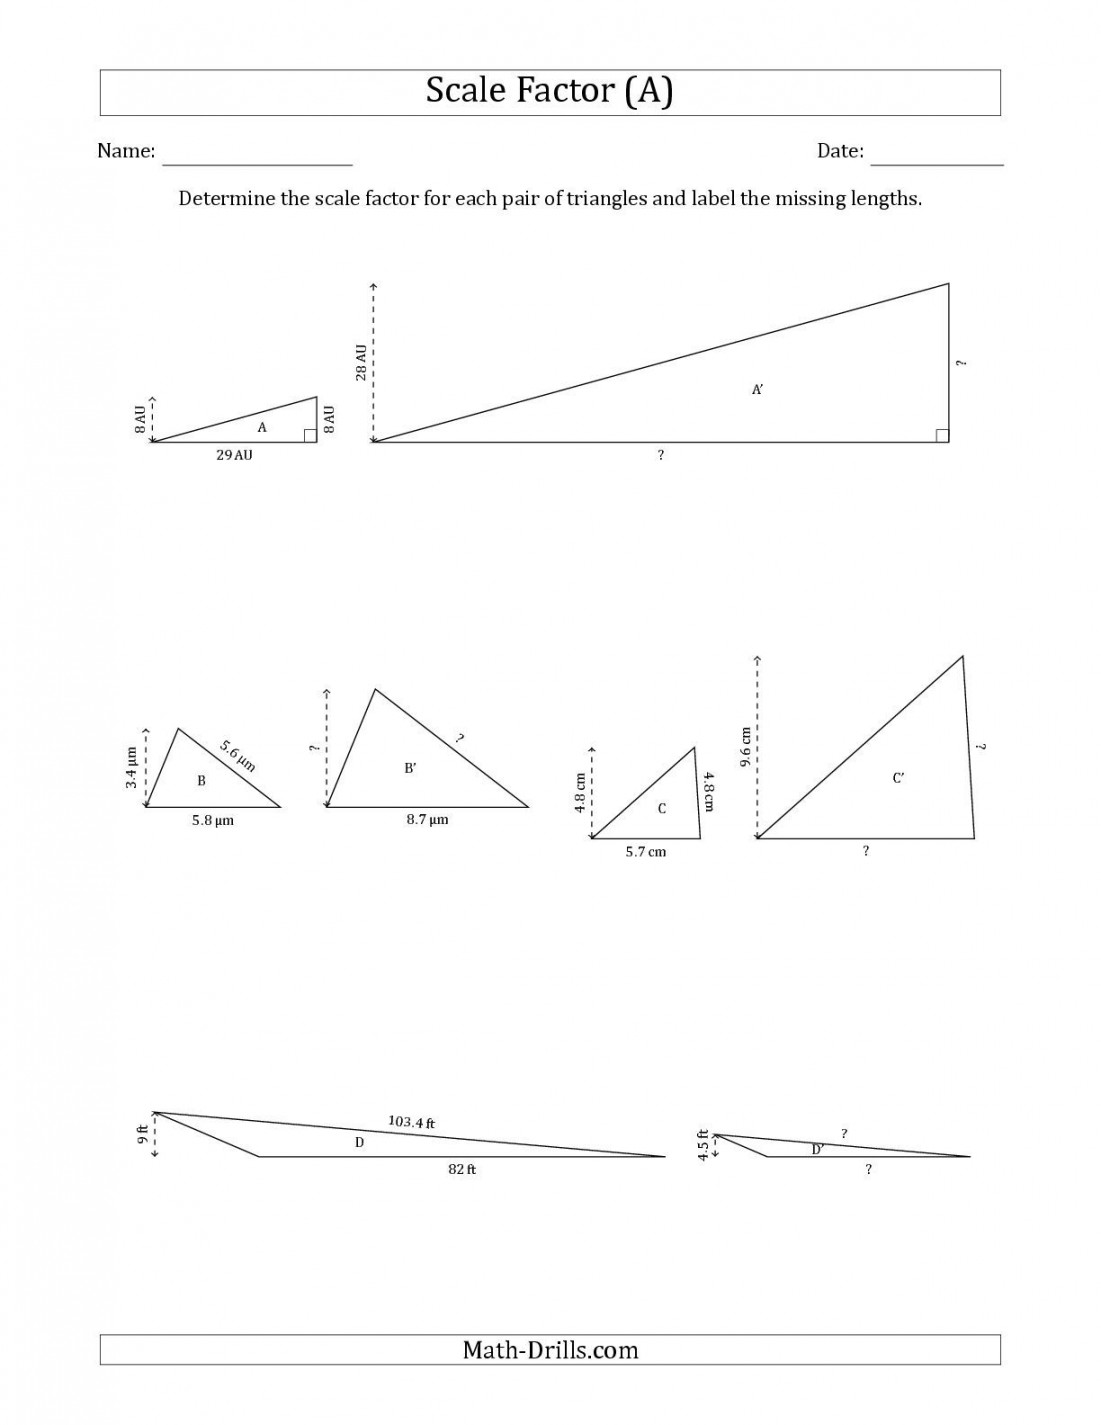 The Determine the Scale Factor Between Two Triangles and Determine